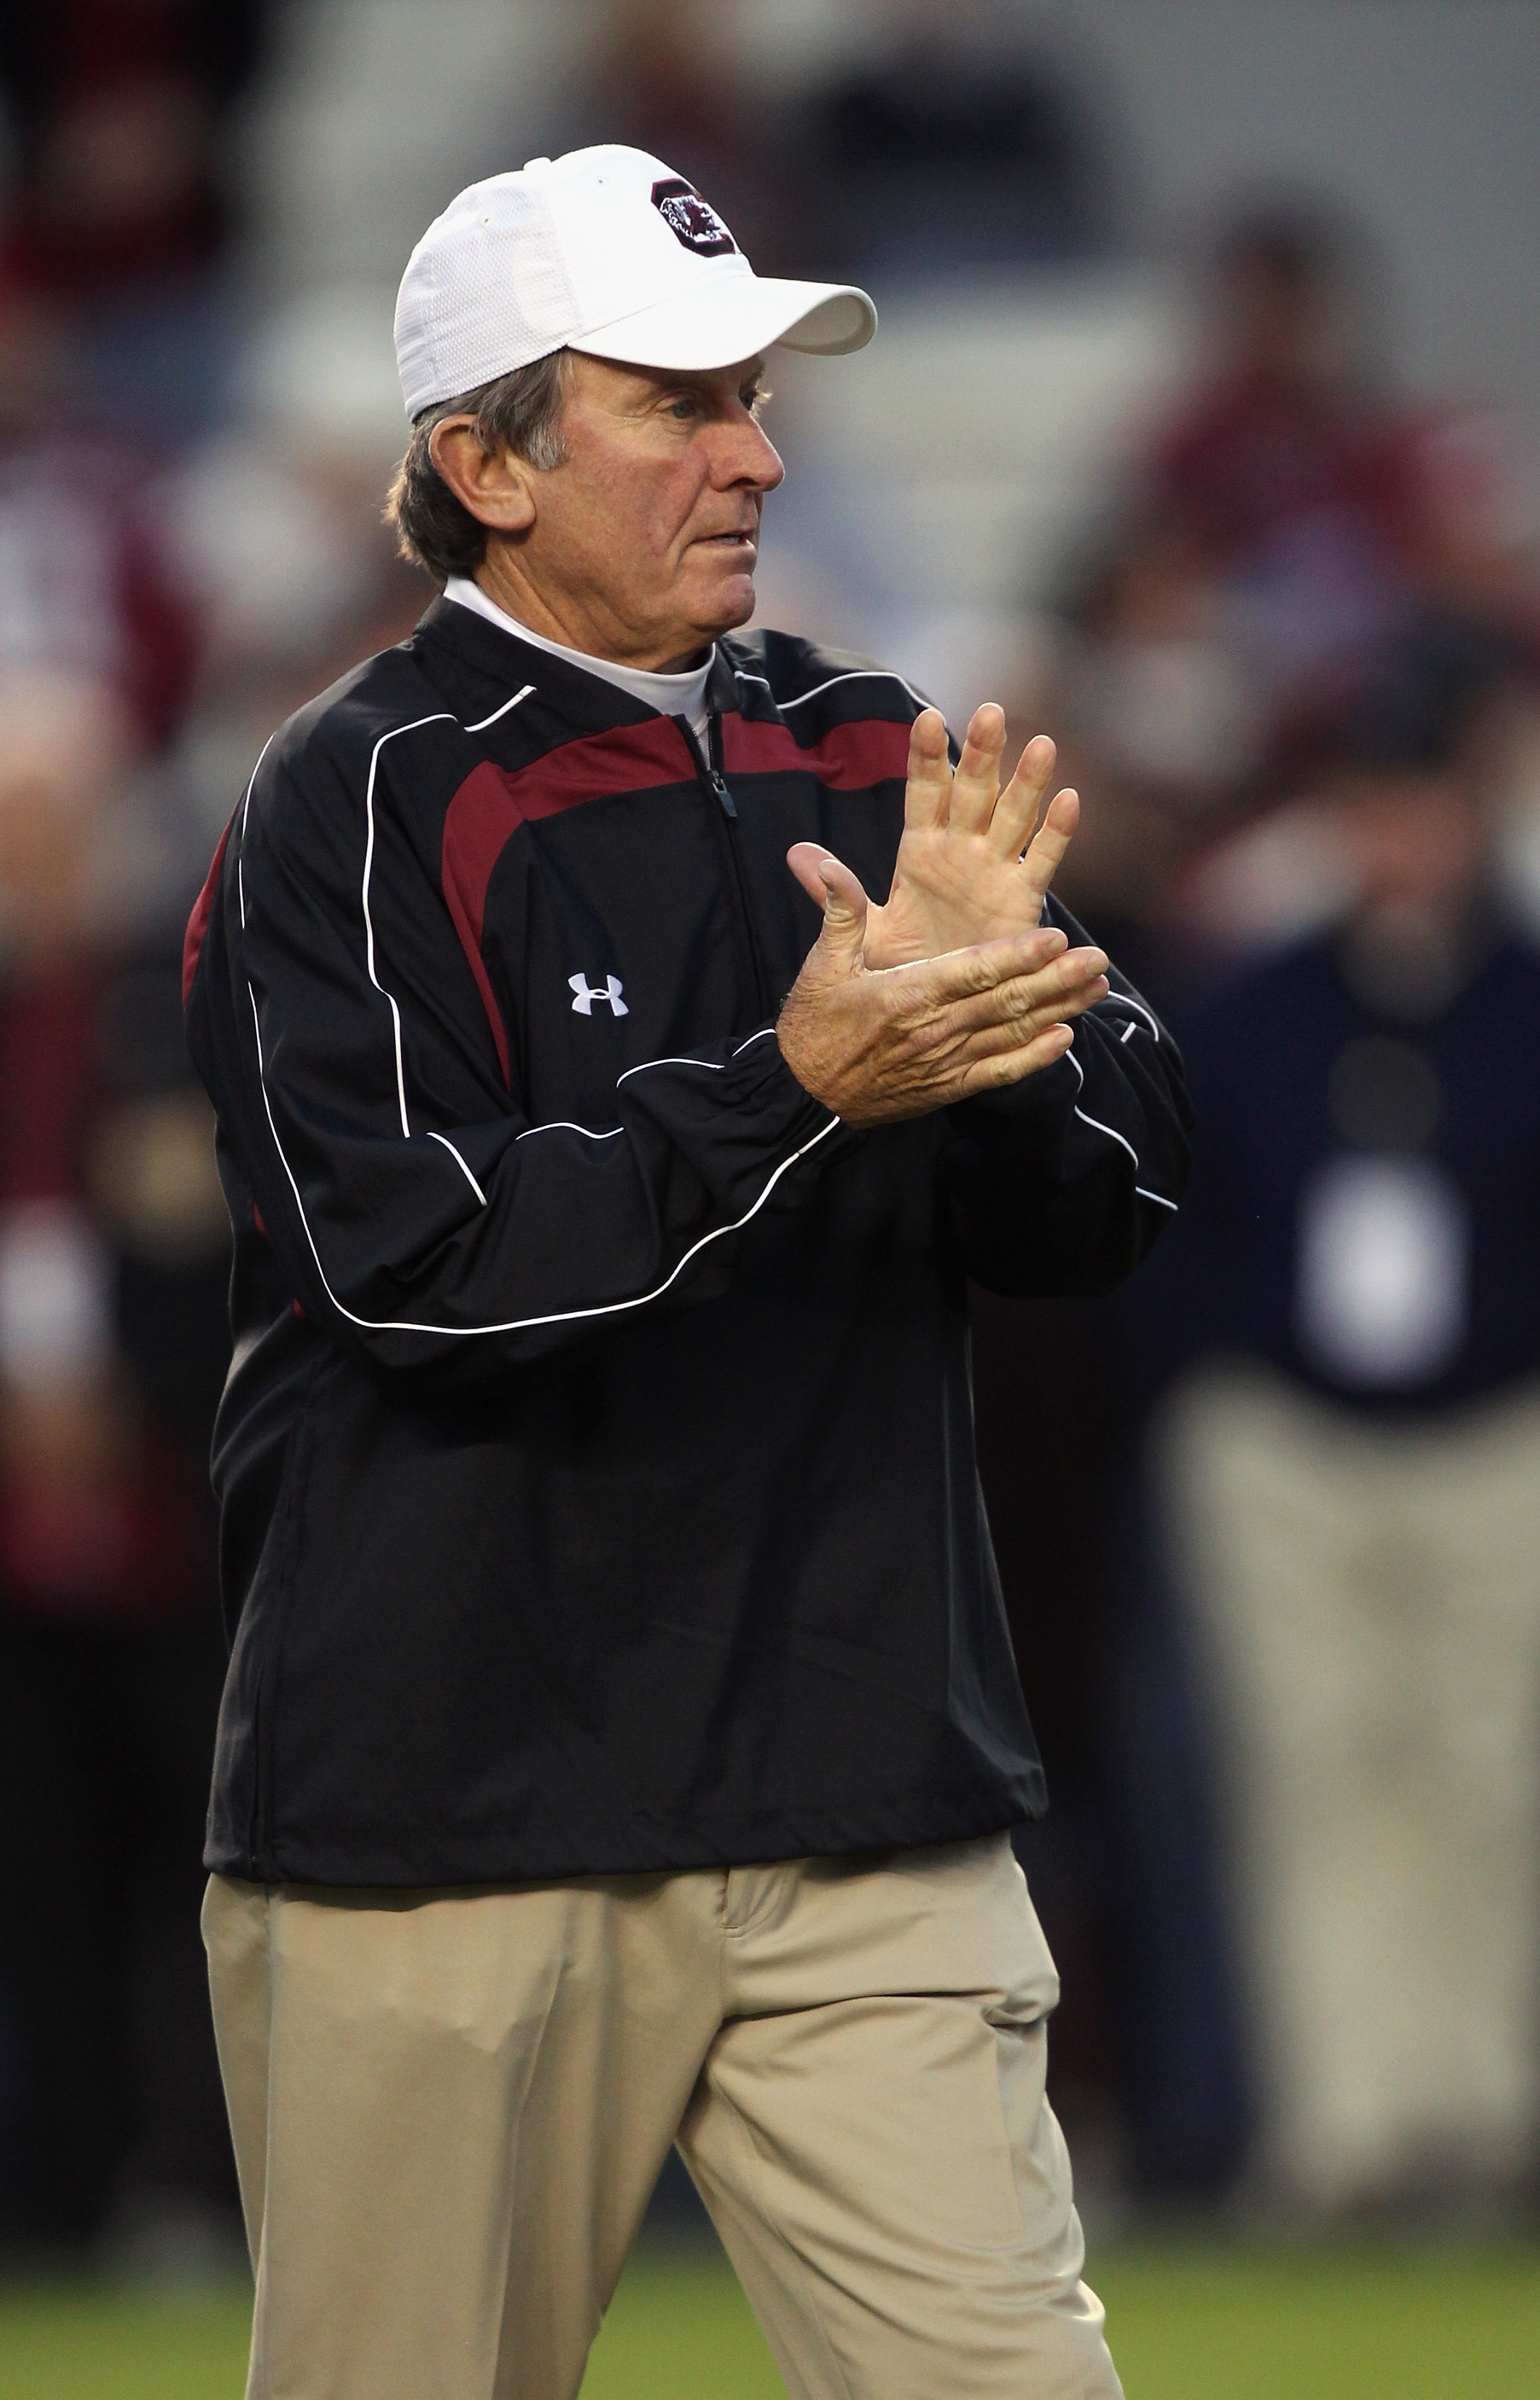 COLUMBIA, SC - NOVEMBER 06:  Head coach Steve Spurrier of the South Carolina Gamecocks cheers on his team during warm ups before the start of their game against the Arkansas Razorbacks at Williams-Brice Stadium on November 6, 2010 in Columbia, South Carol